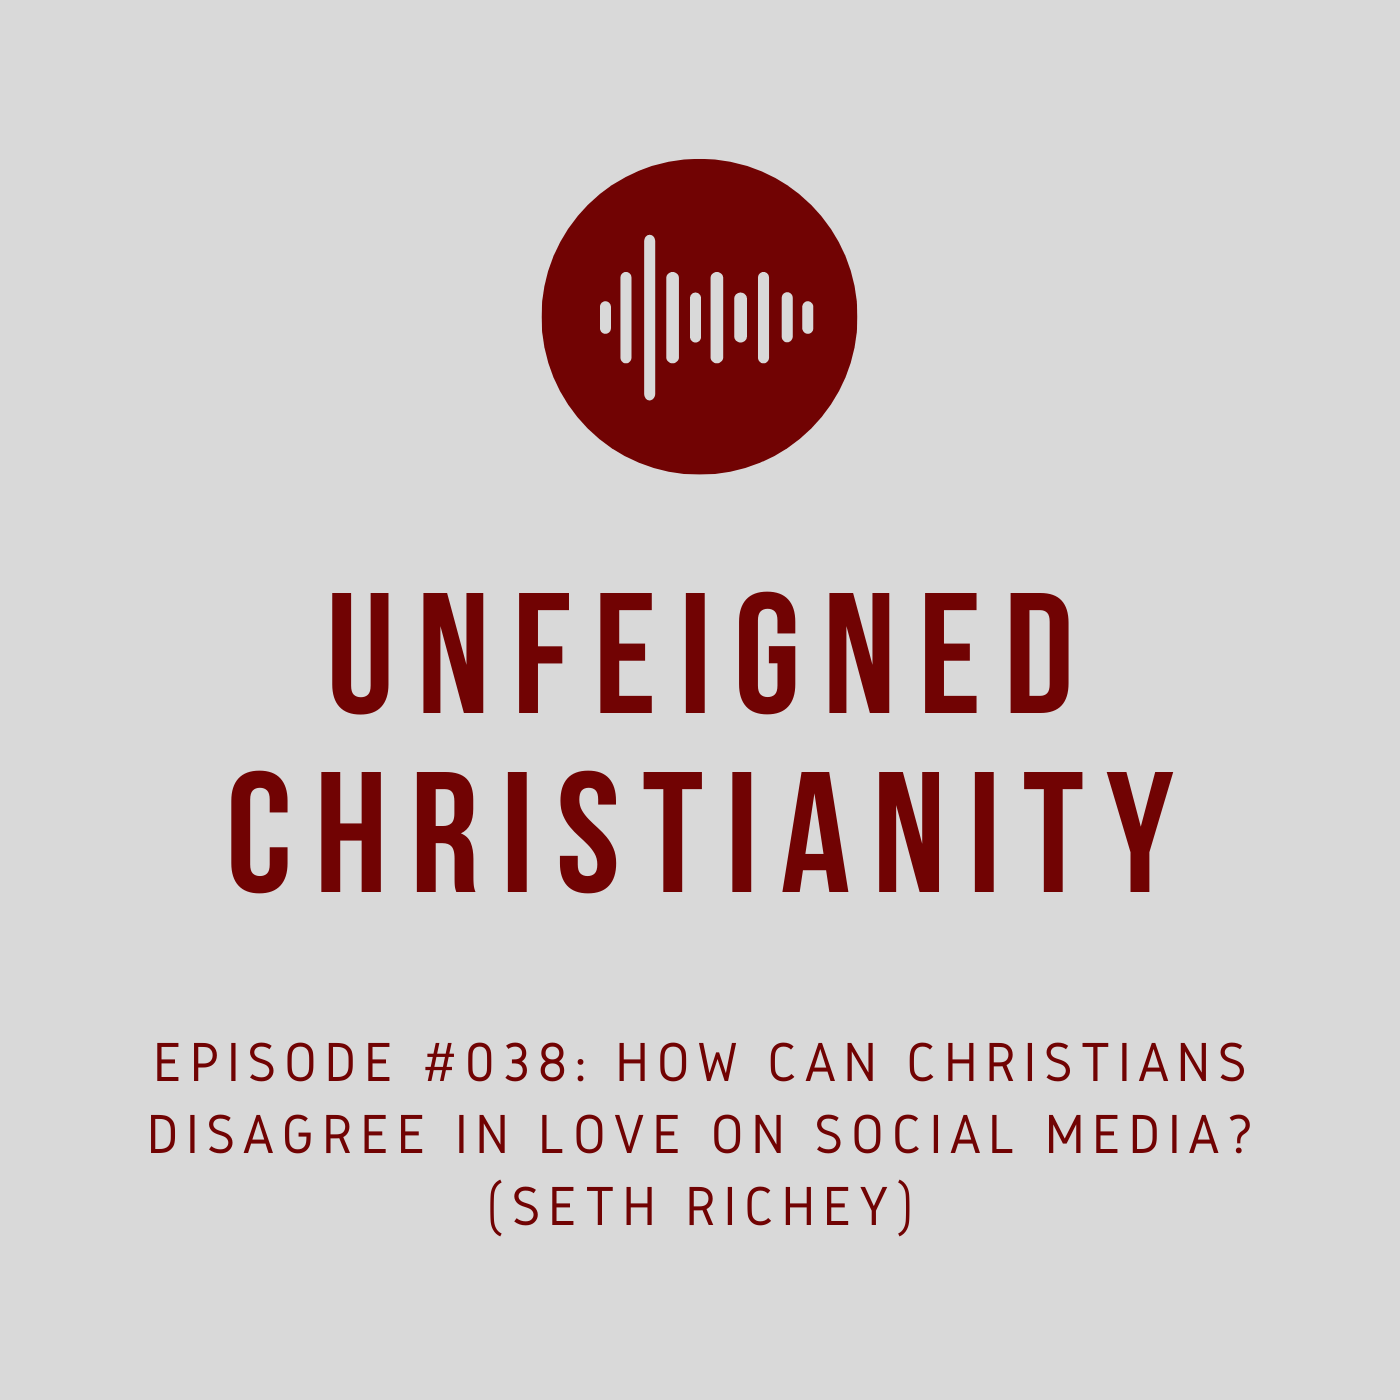 #038 - How Can Christians Disagree in Love on Social Media? (Seth Richey)